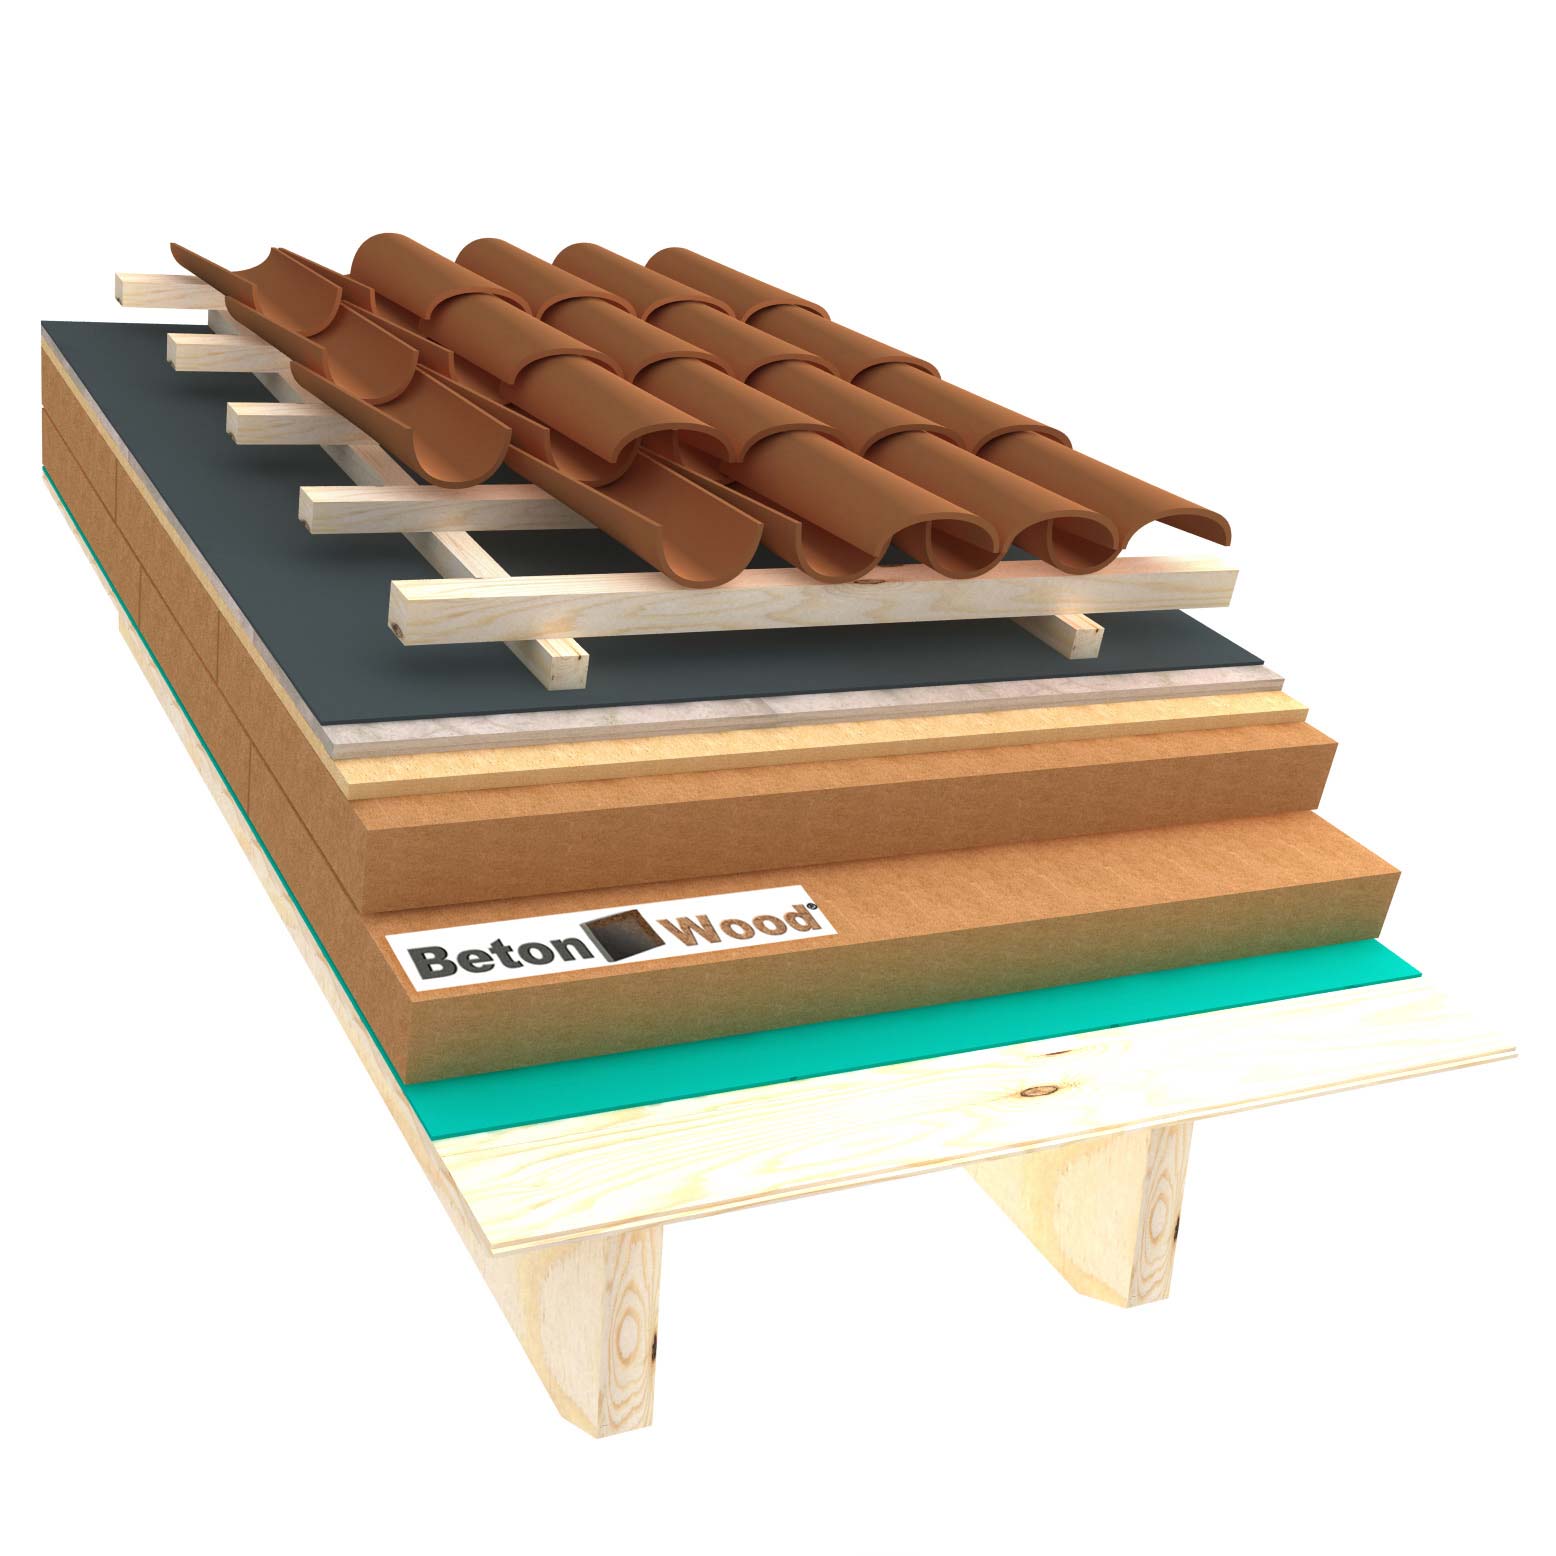 Ventilated roof with wood fiber Isorel, Universal and cement bonded particle boards on matchboarding